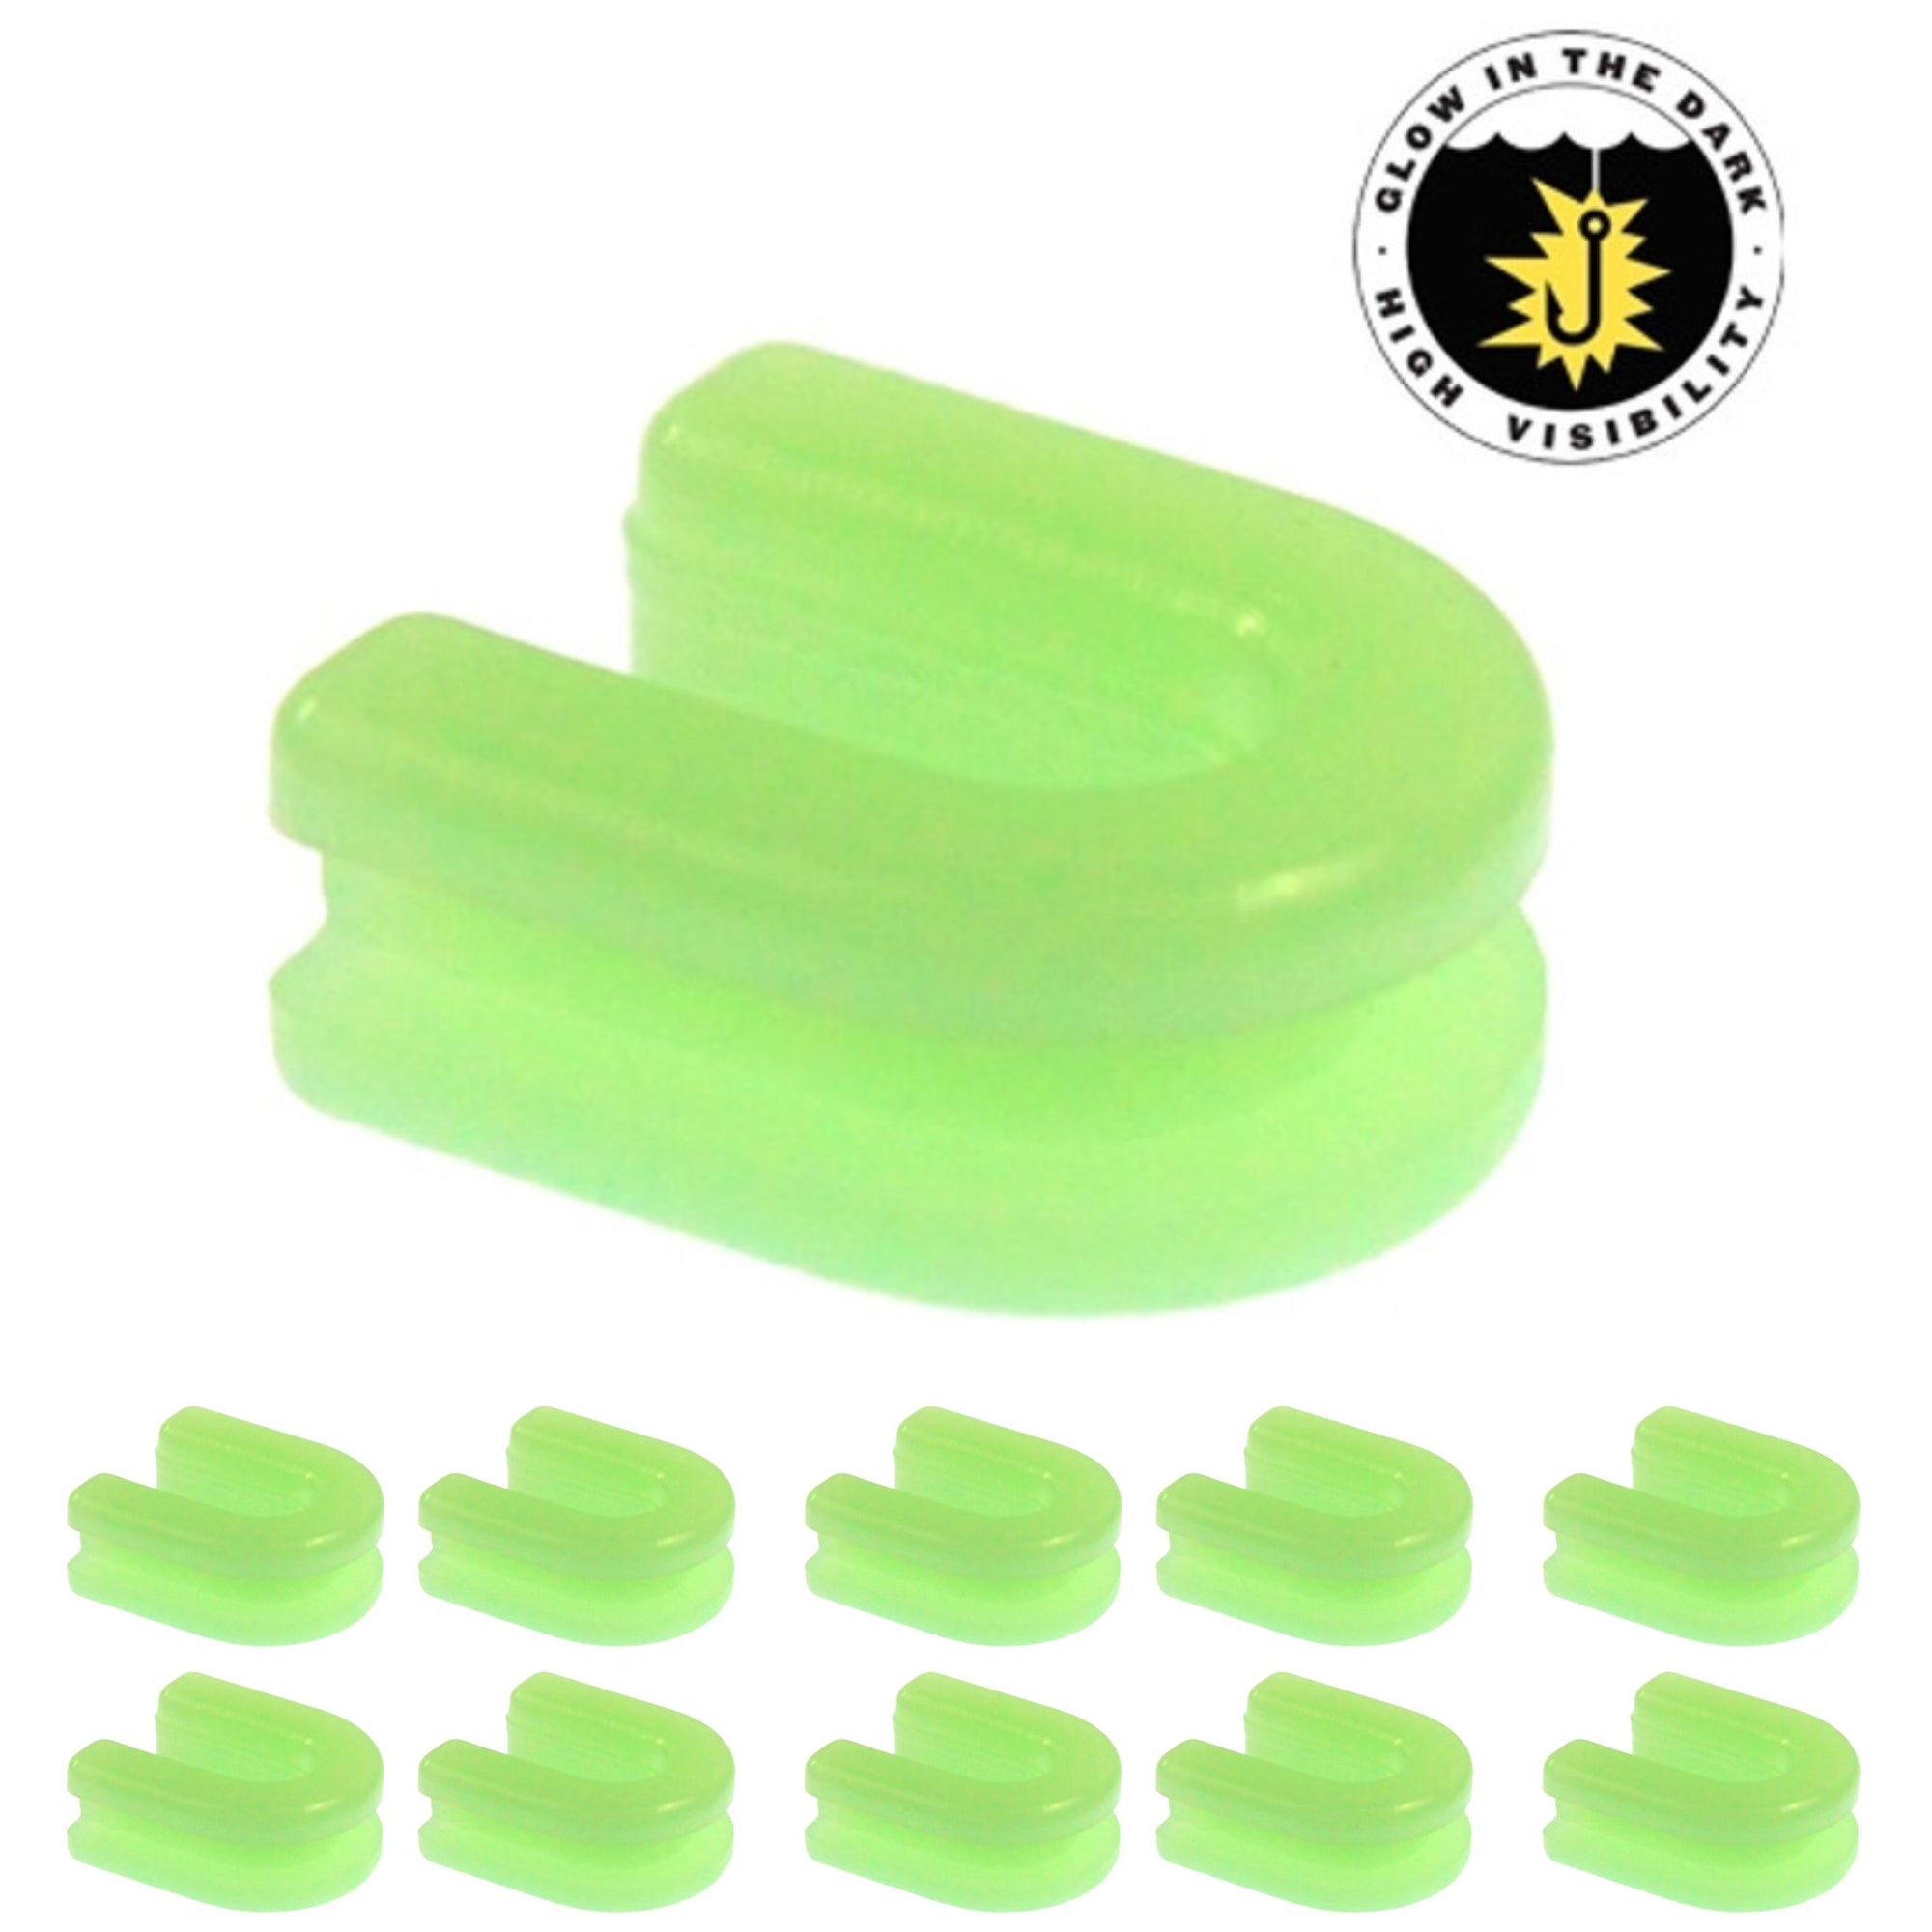 Luminous Fishing Thimbles | 10 Pack - South East Clearance Centre